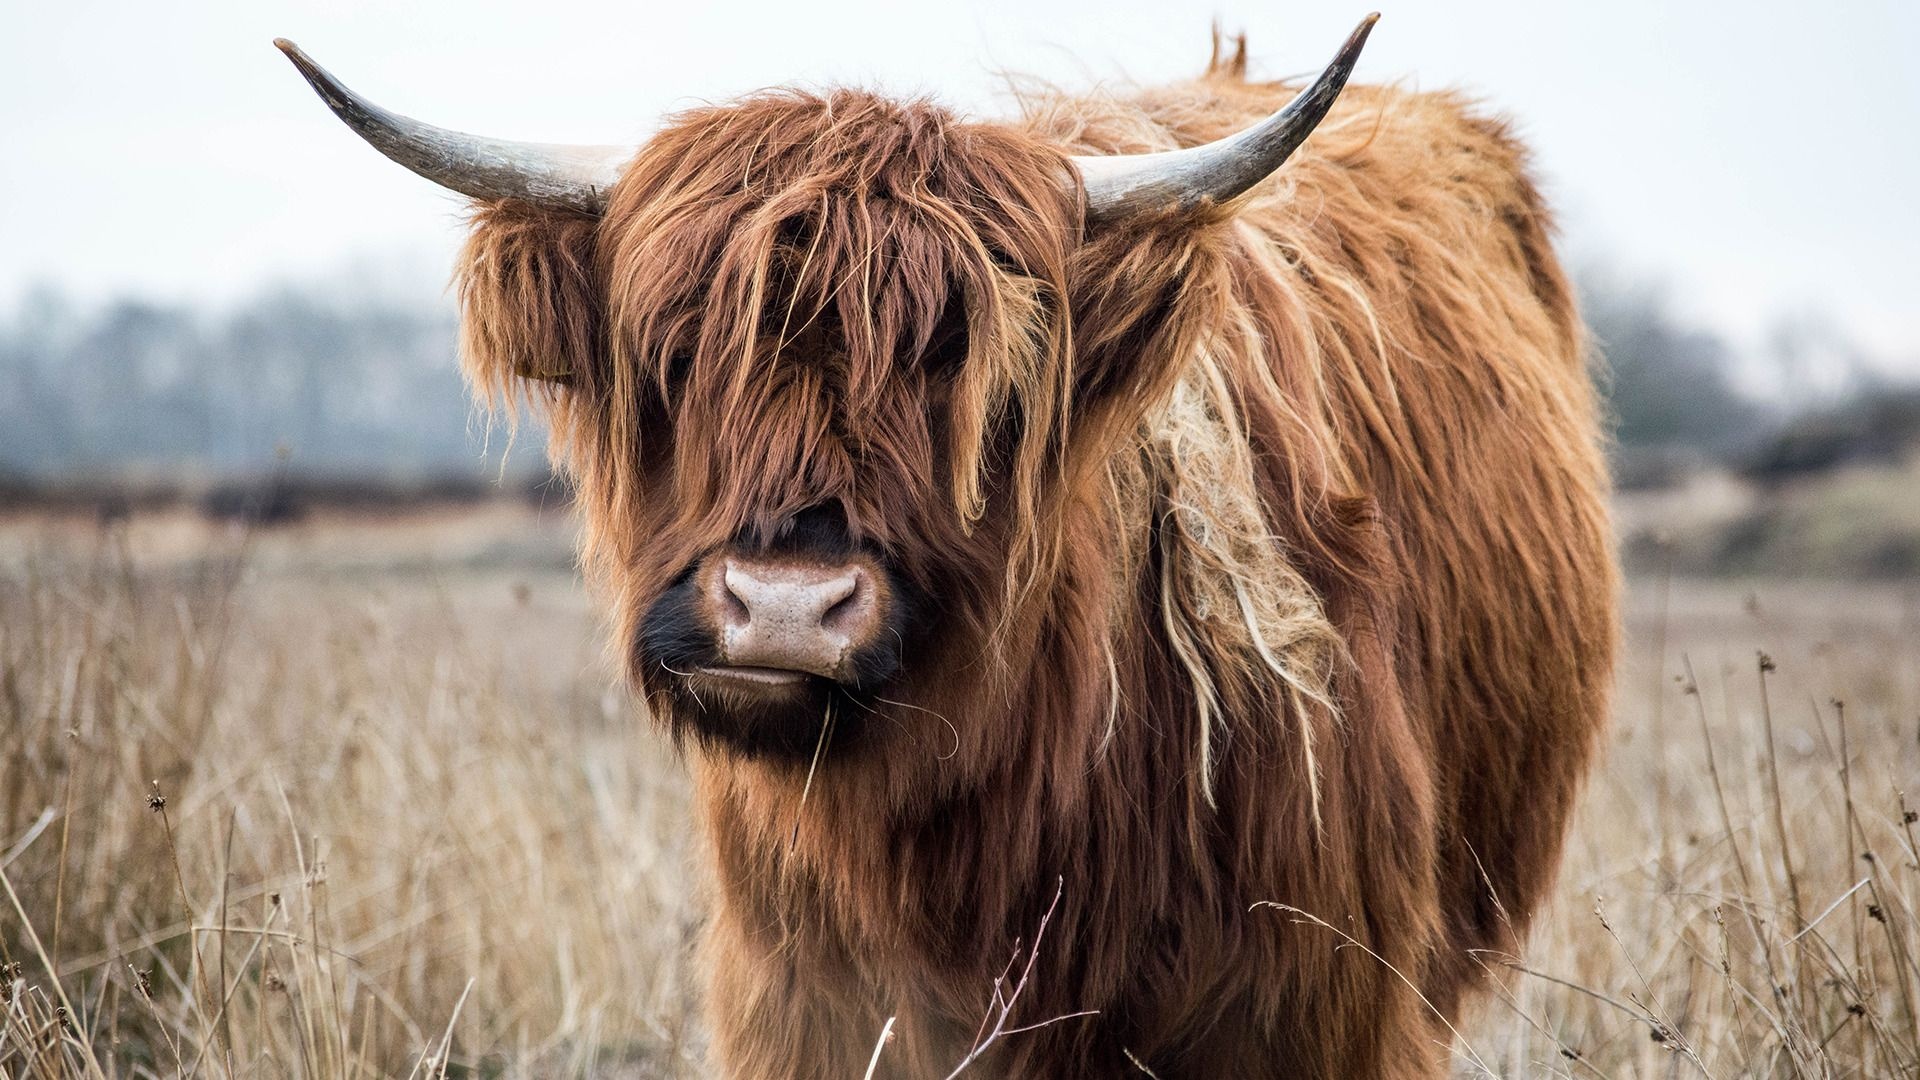 Highland cow wallpapers, Stunning backgrounds, Magnificent creatures, Highland beauty, 1920x1080 Full HD Desktop